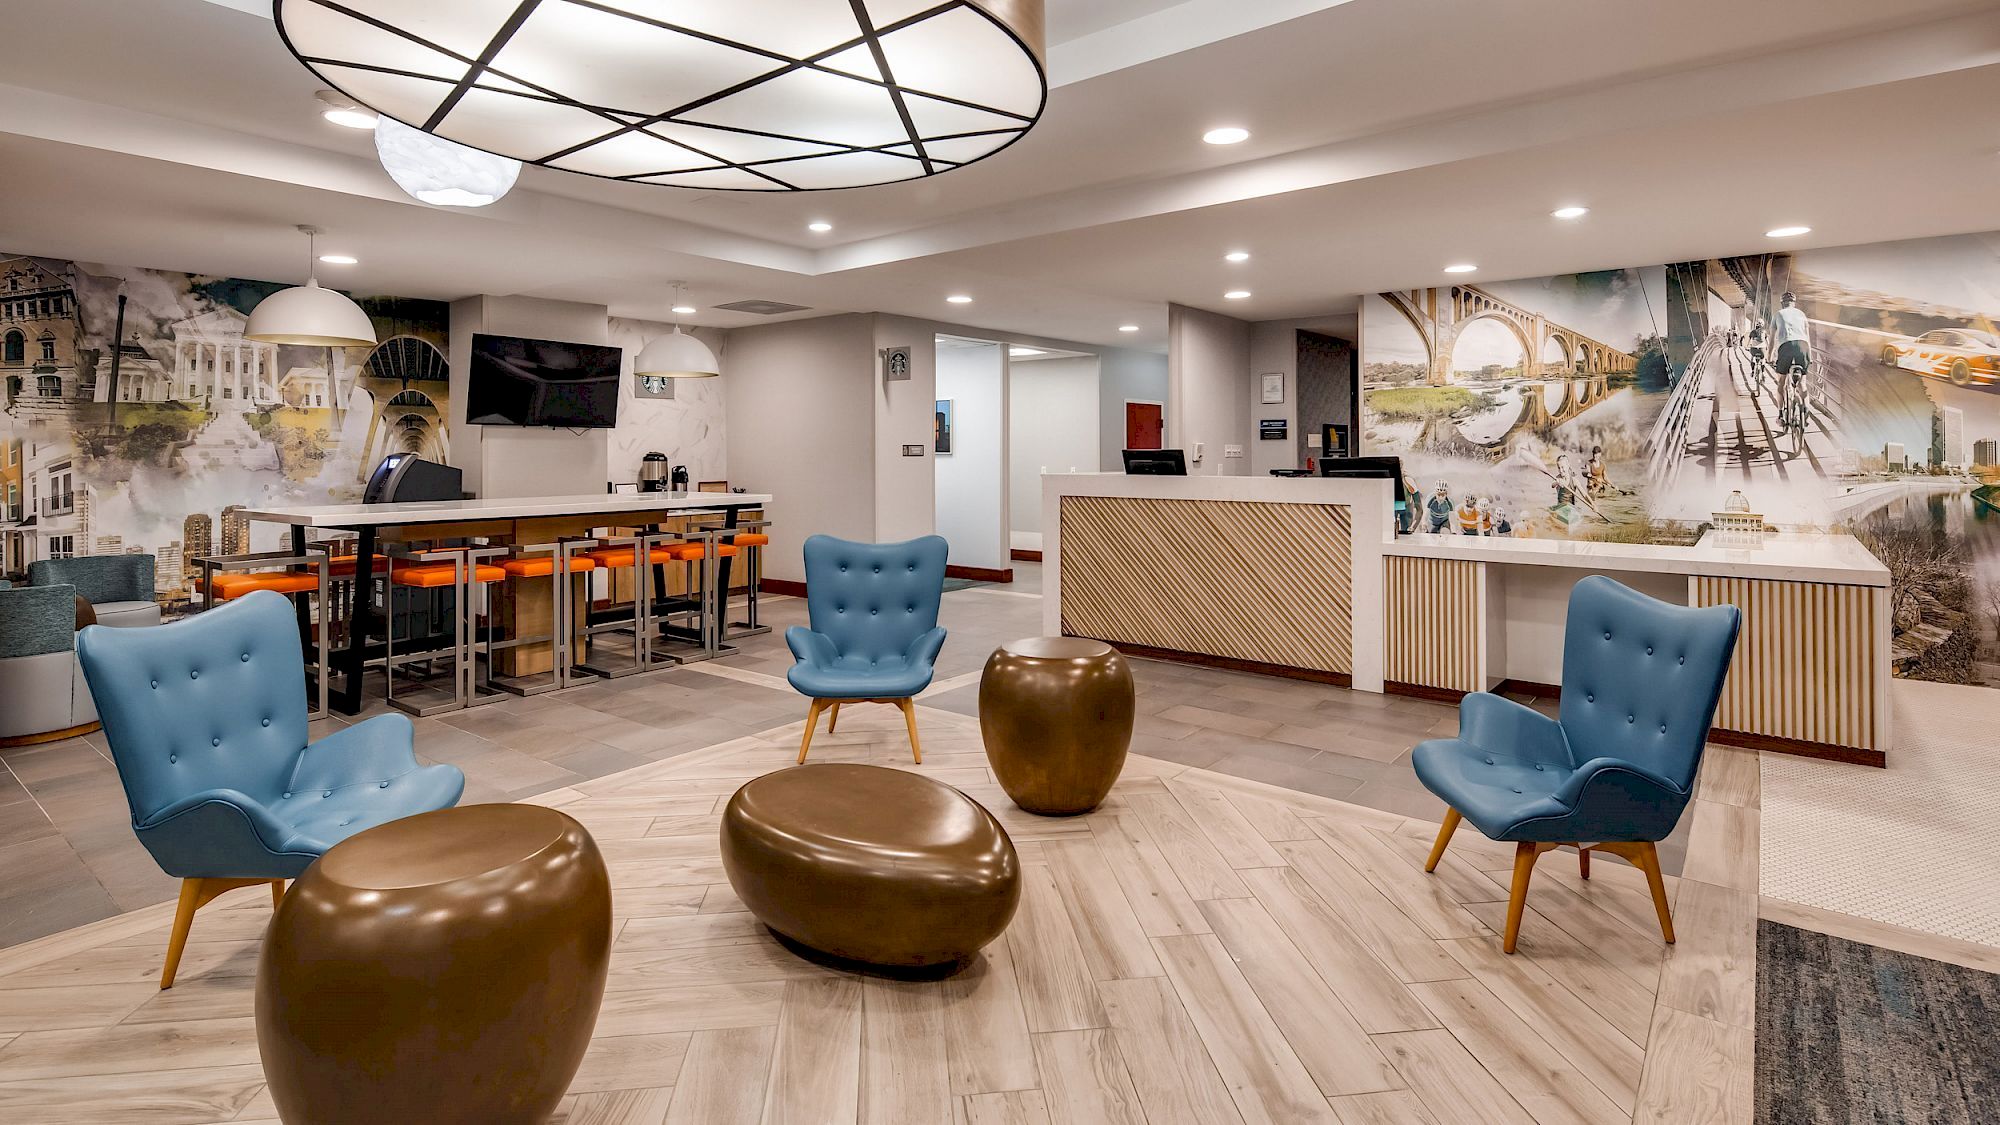 A modern lobby with blue chairs, brown ottomans, a front desk, wall art, bar seating, and contemporary lighting fixtures ends the sentence.